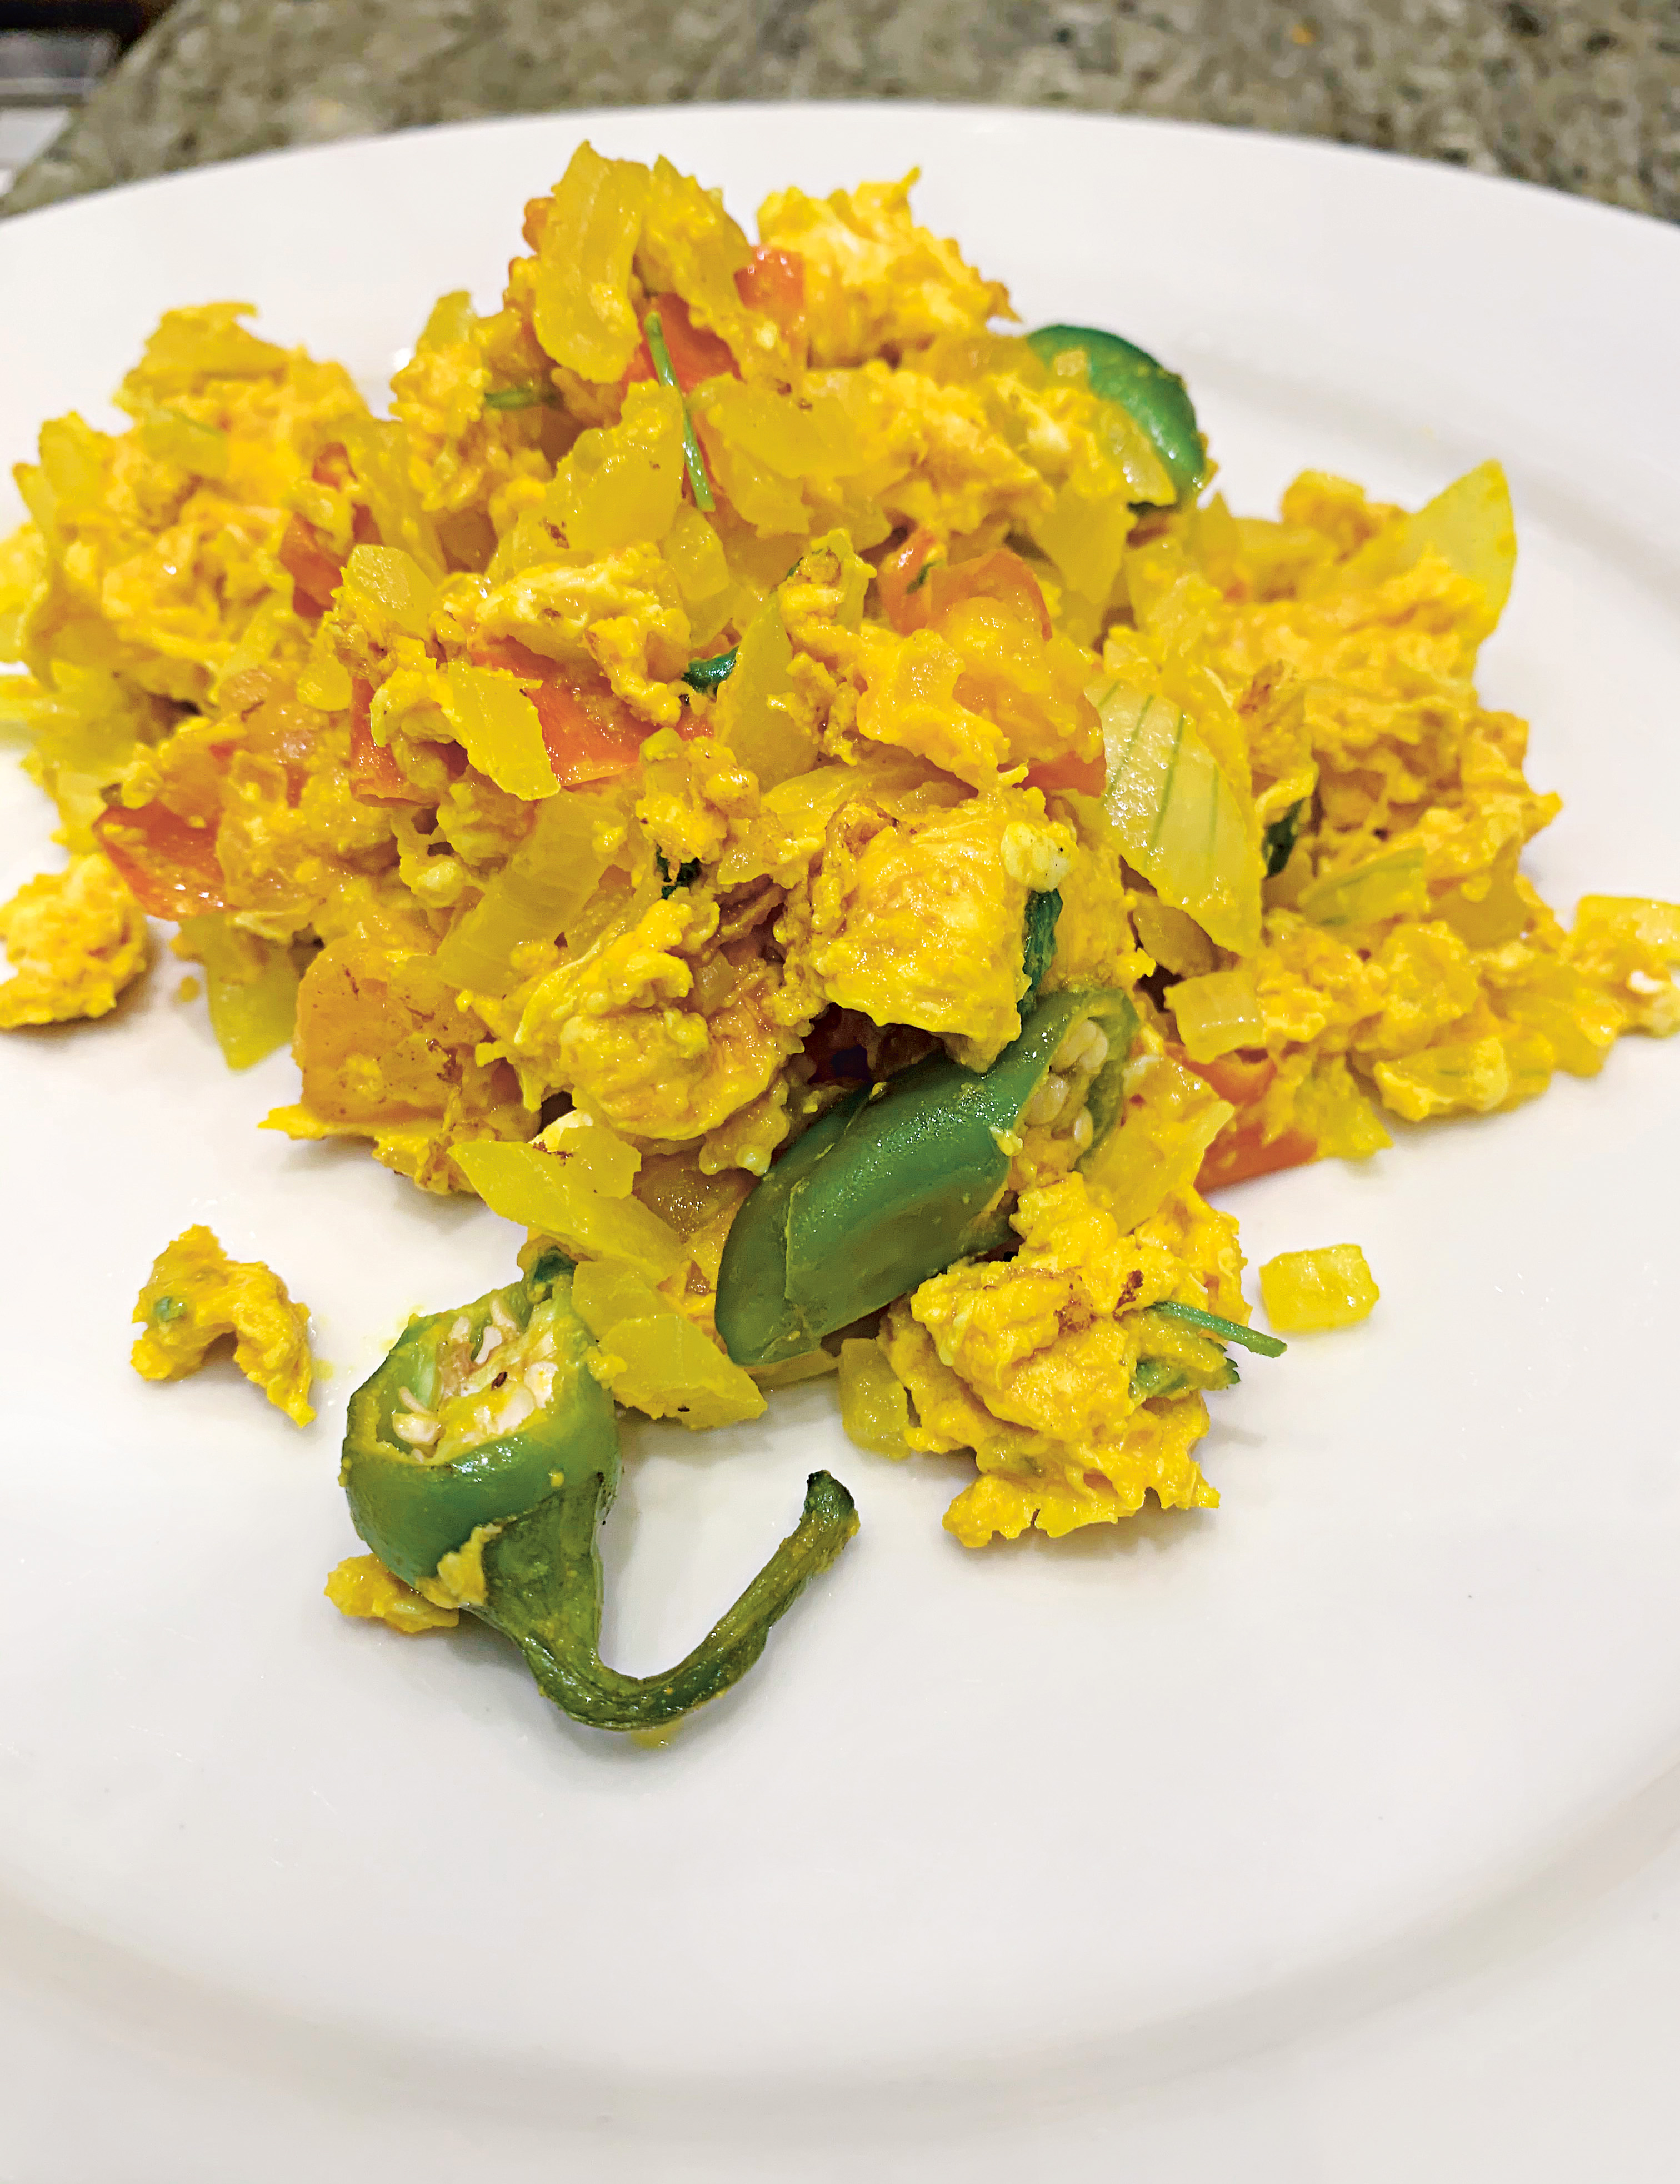 Spicy Scrambled Eggs, by Asma Khan. Photo courtesy of the chef, Darjeeling Express